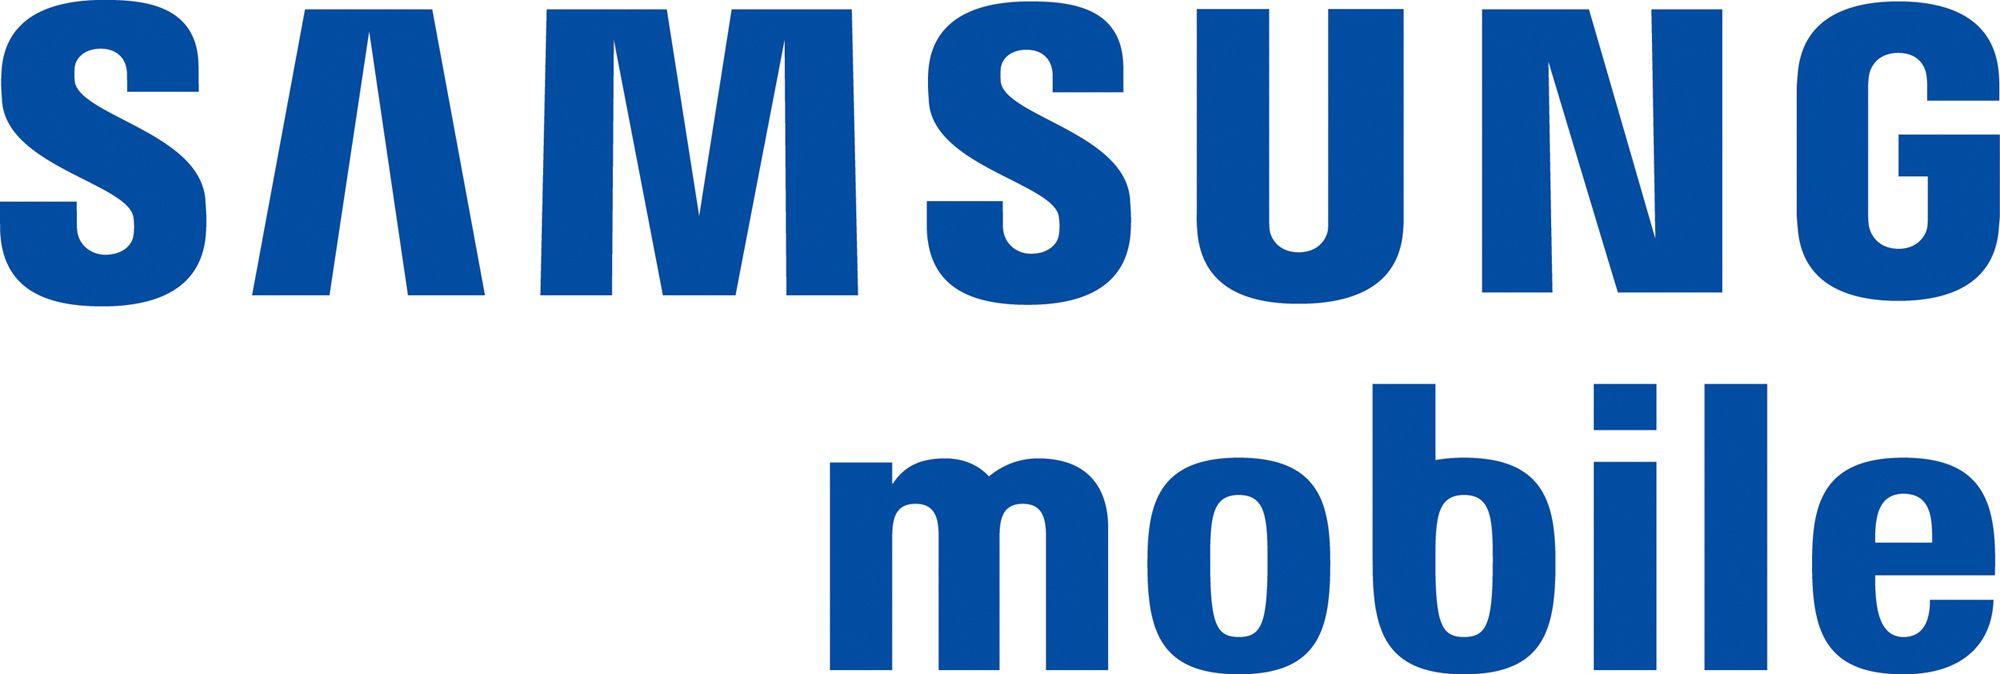 Samsung Phone Logo - Boost Mobile Pairs the Speed of 4G LTE and Shrinking Payments with ...